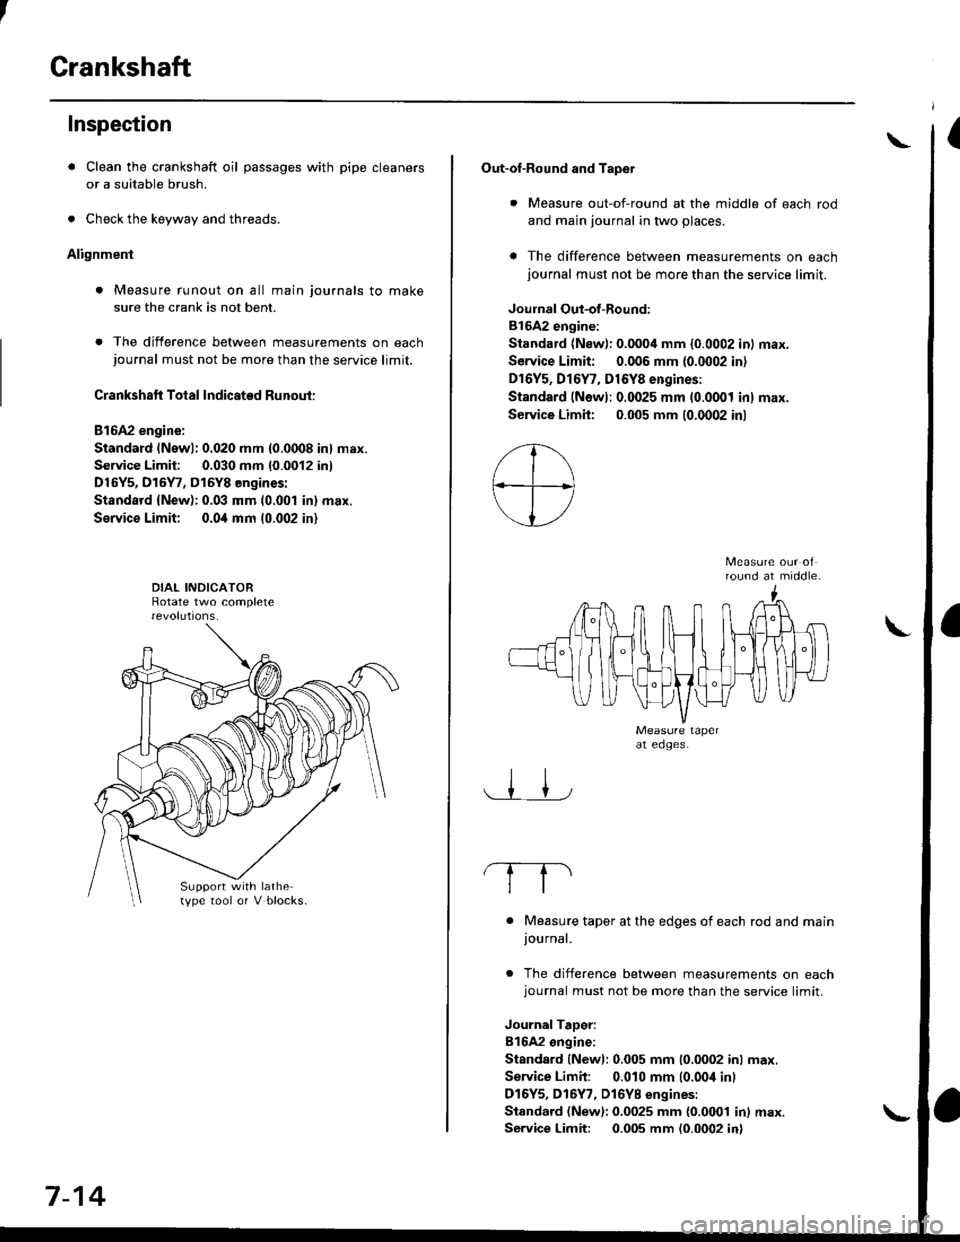 HONDA CIVIC 1996 6.G Workshop Manual Crankshaft
Inspection
. Clean the crankshaft oil passages with pipe cleaners
or a suitable brush.
. Check the keyway and threads.
Alignment
. Measure runout on all main journals to make
sure the crank